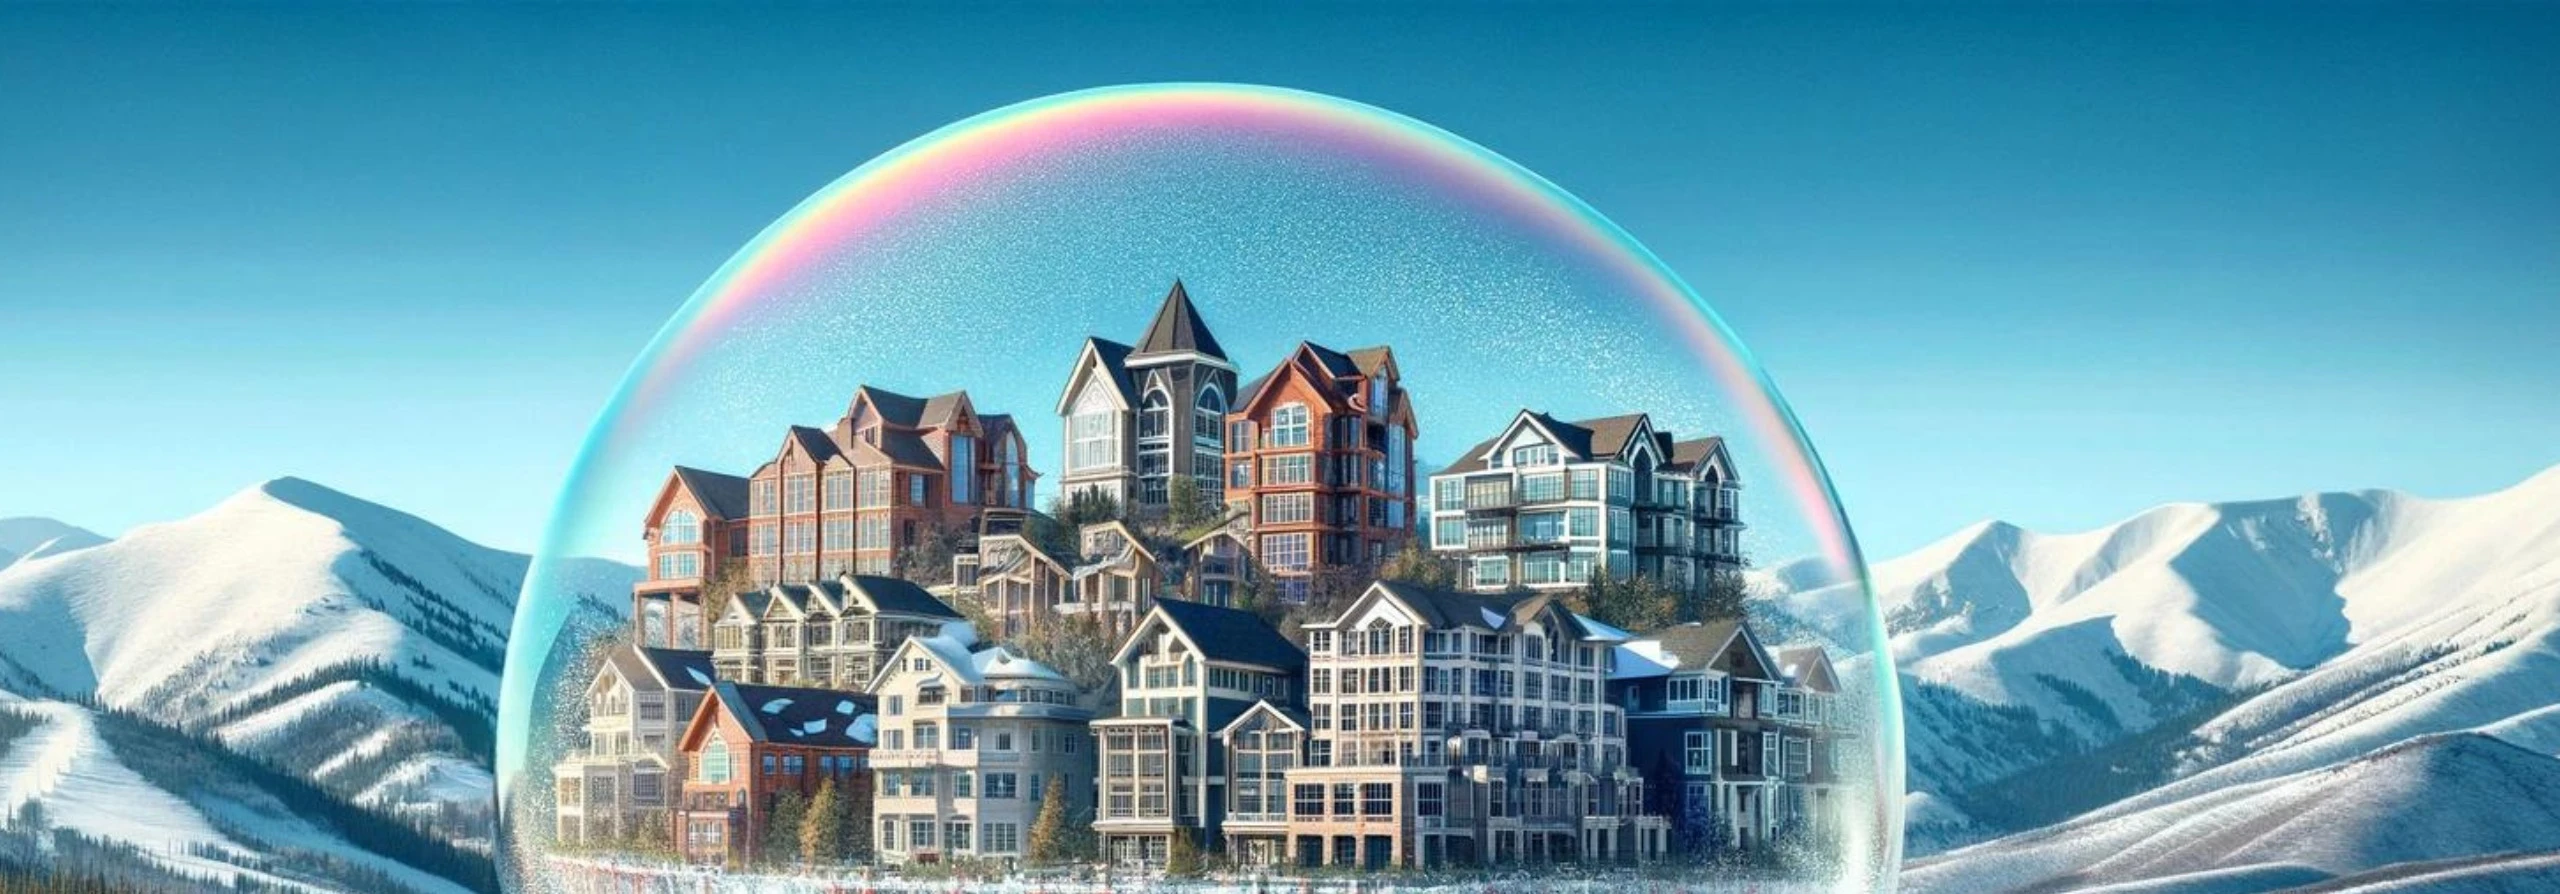 Image of Park City in a Bubble